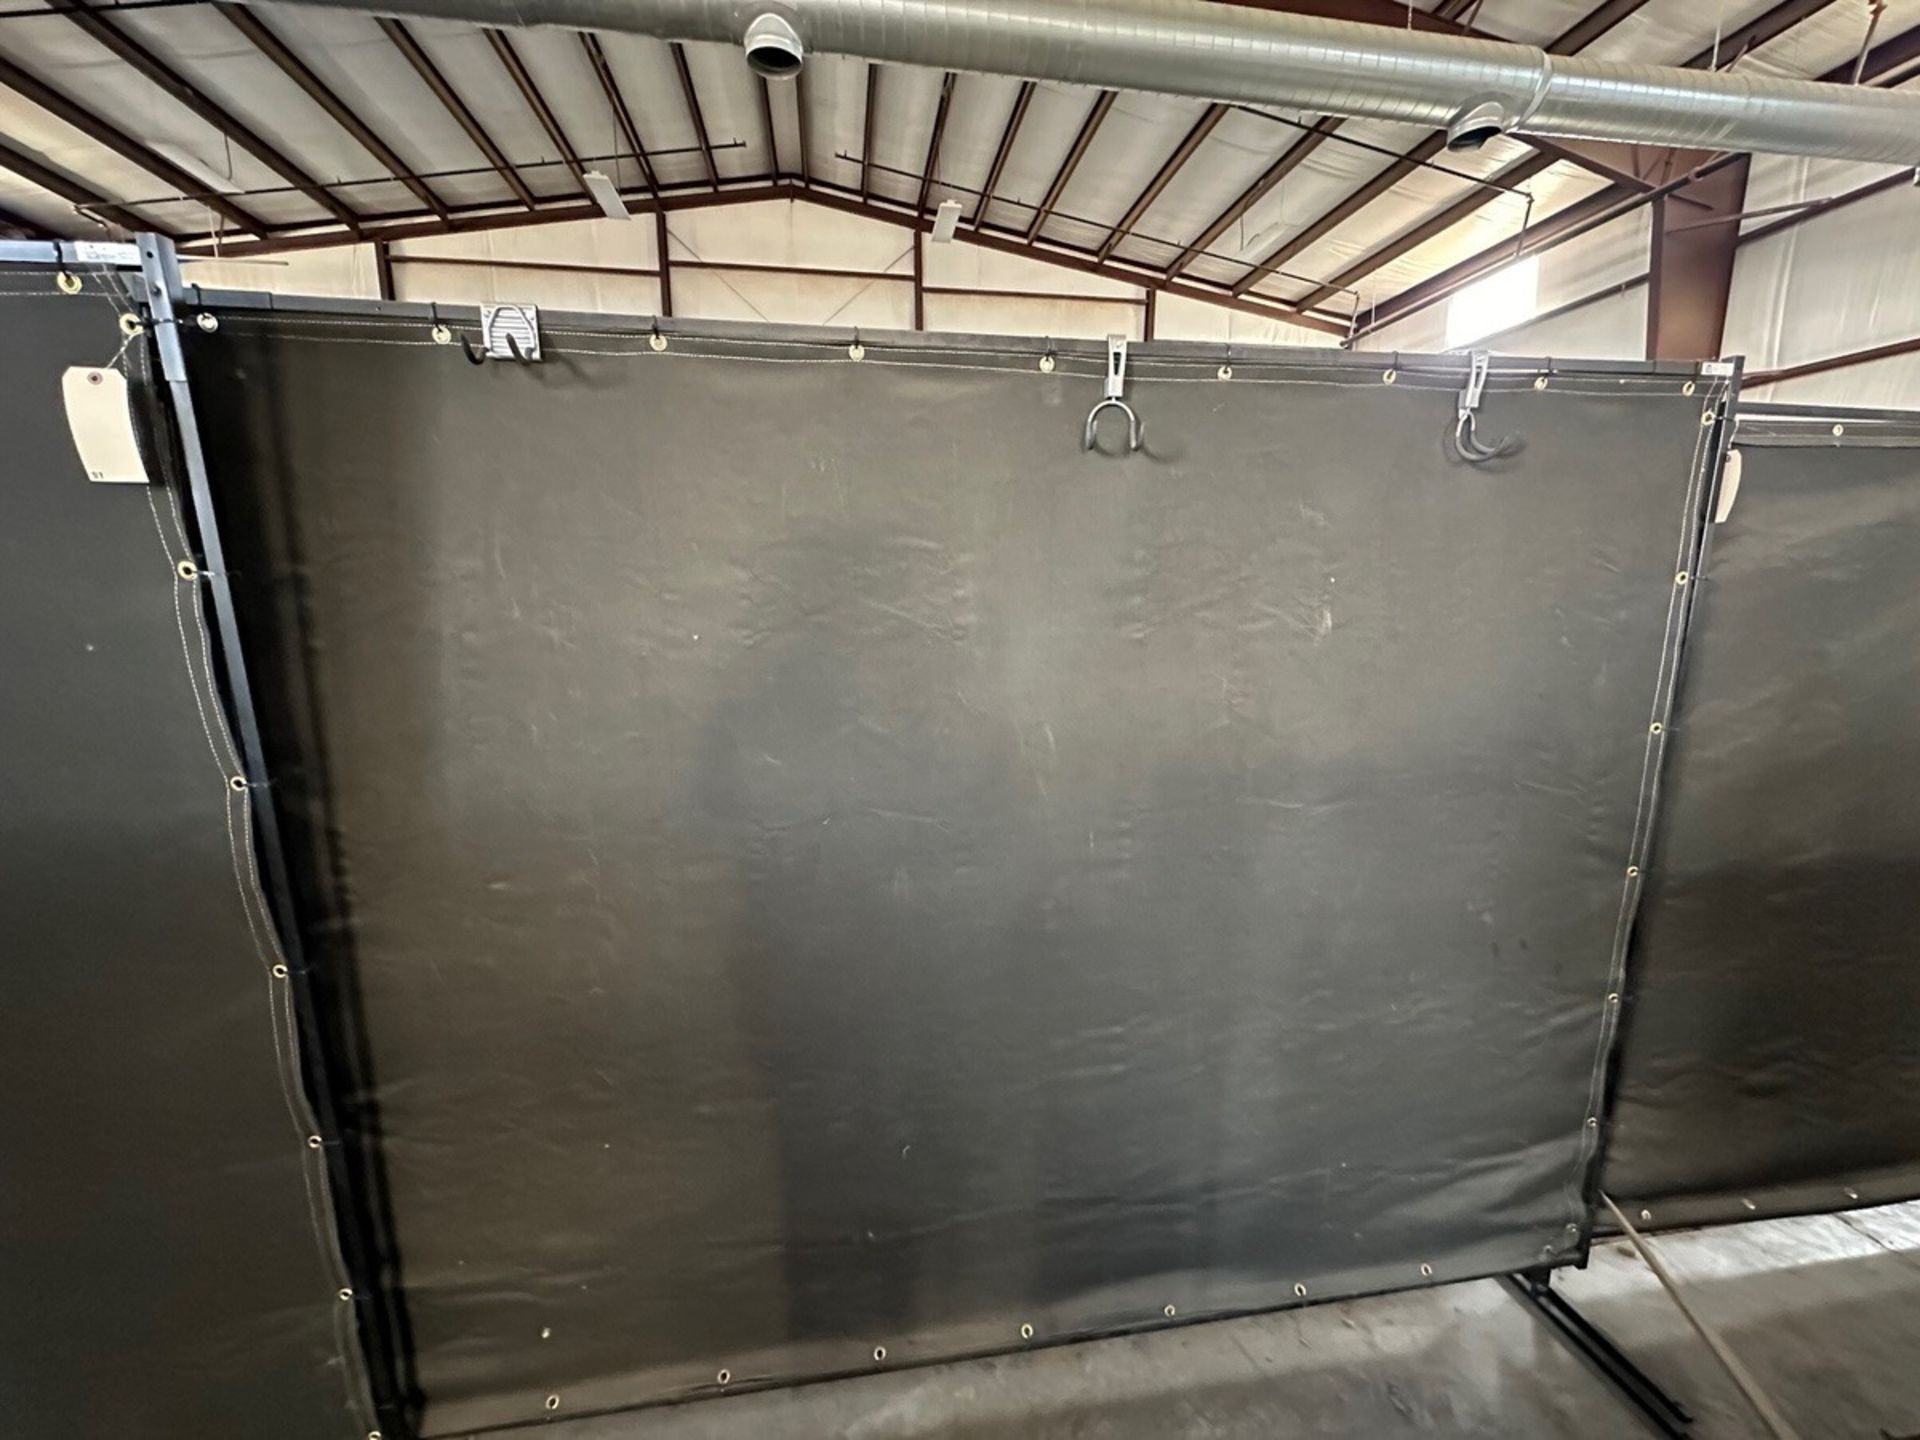 6 Welding Curtains | Rig Fee $50 - Image 2 of 6